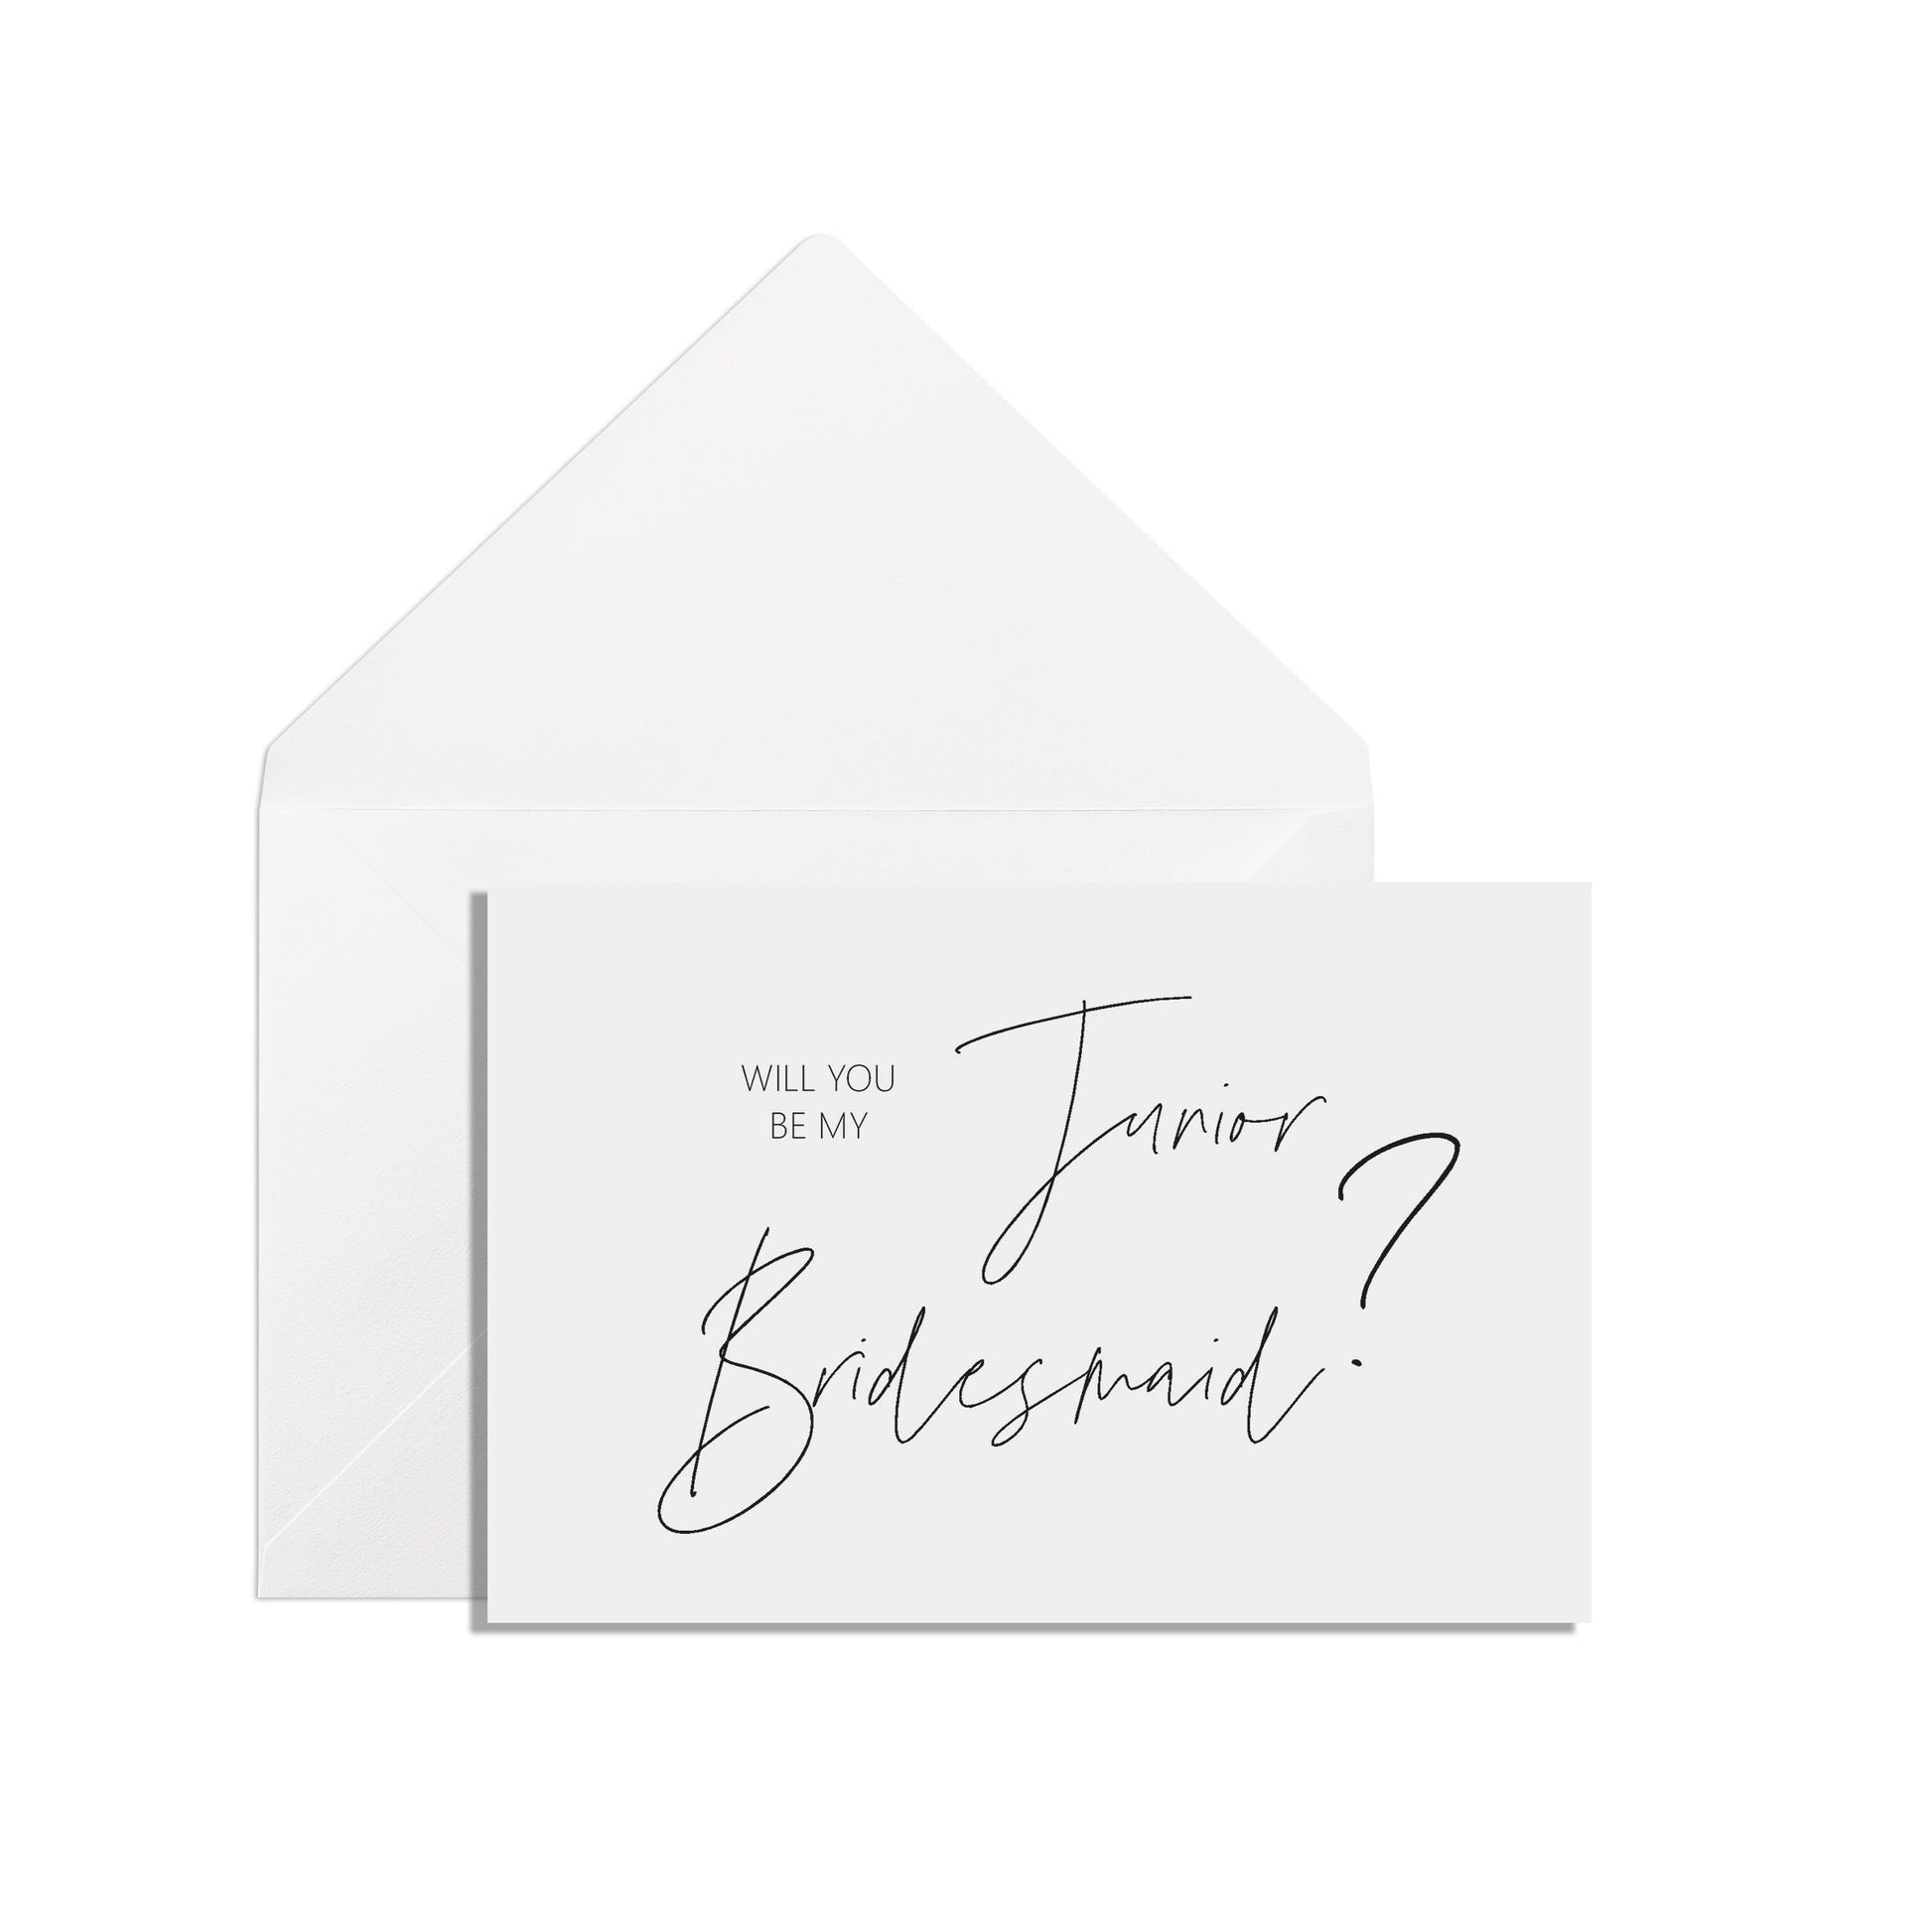 Will You Be My Junior Bridesmaid? A6 Black & White Proposal Card With White Envelope